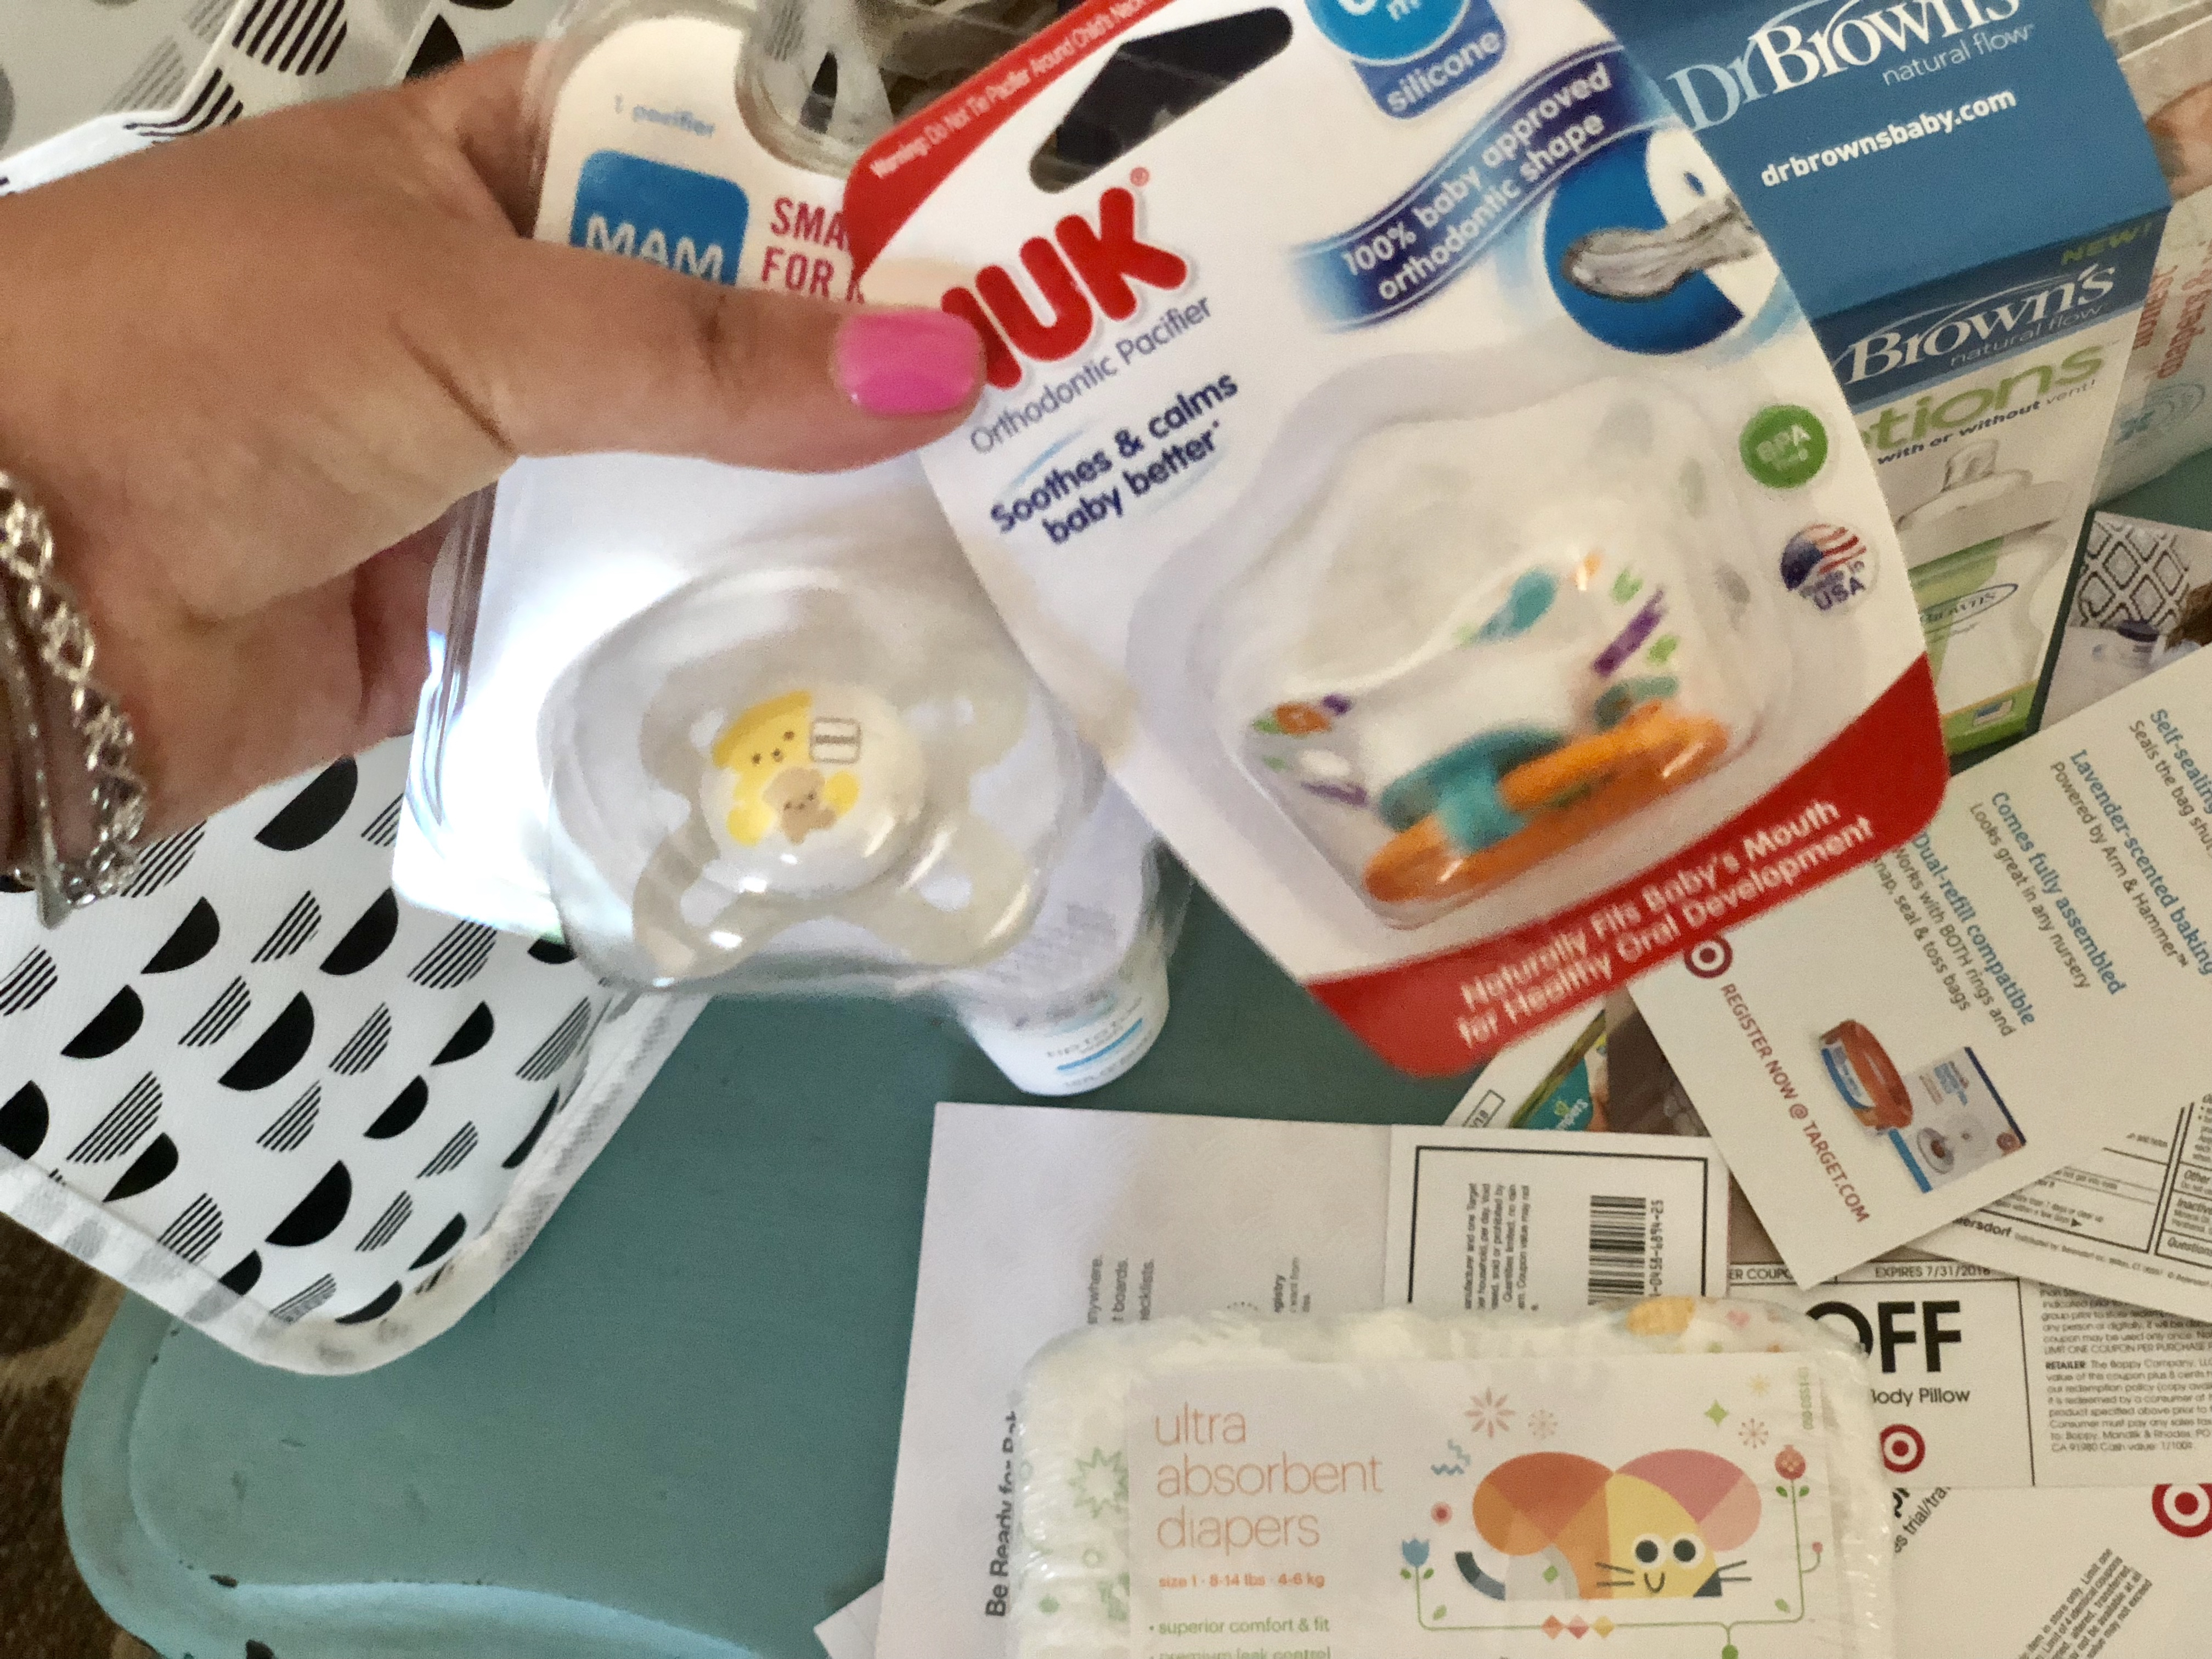 target baby registry bag with free gift coupons and samples - includes Nuk baby soothers